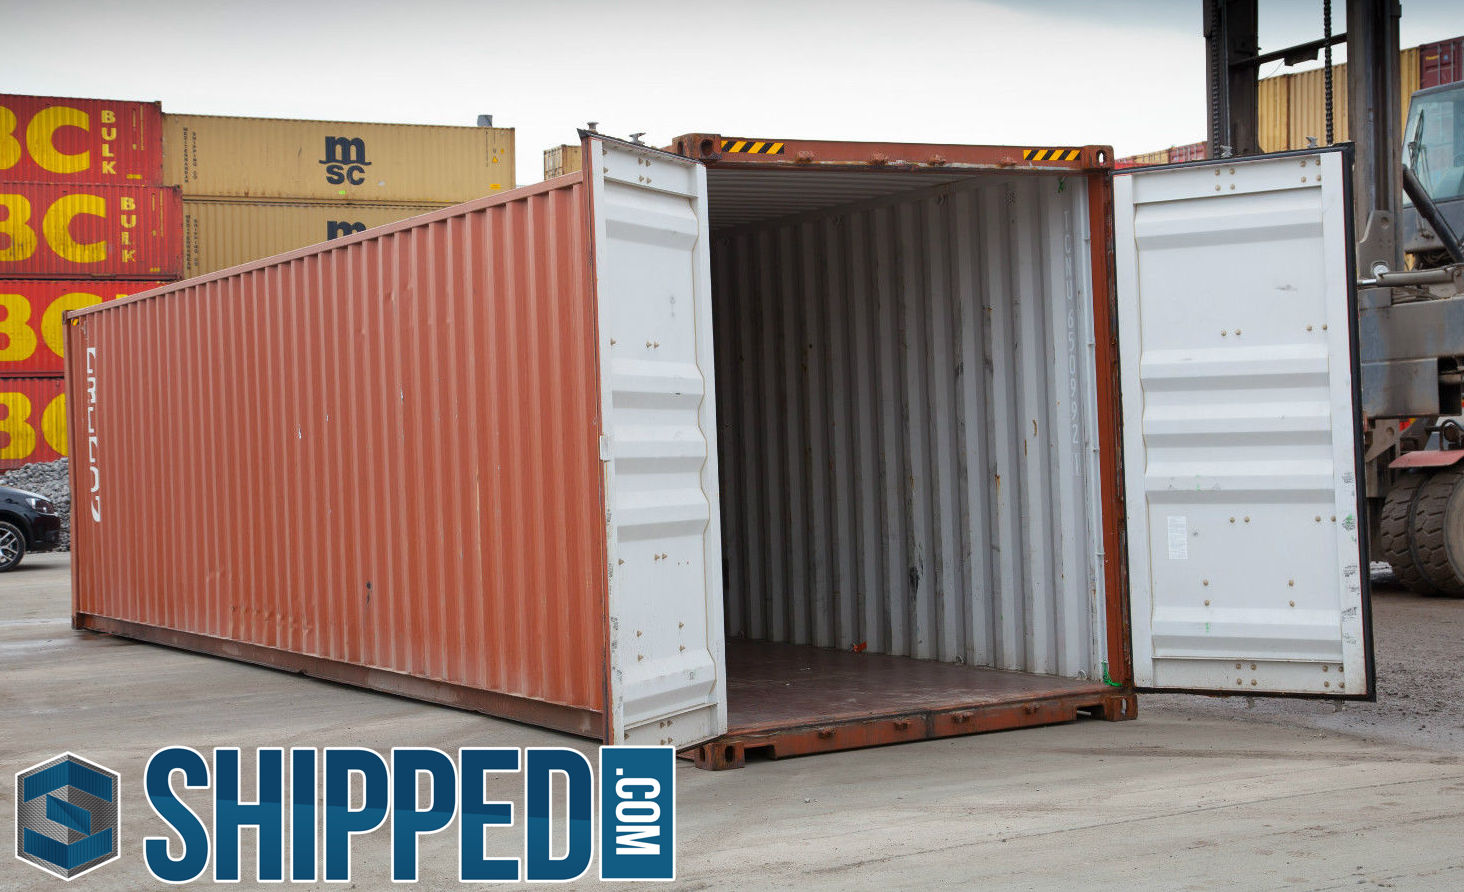 A special container conversion built for the self storage container market  - we will split…